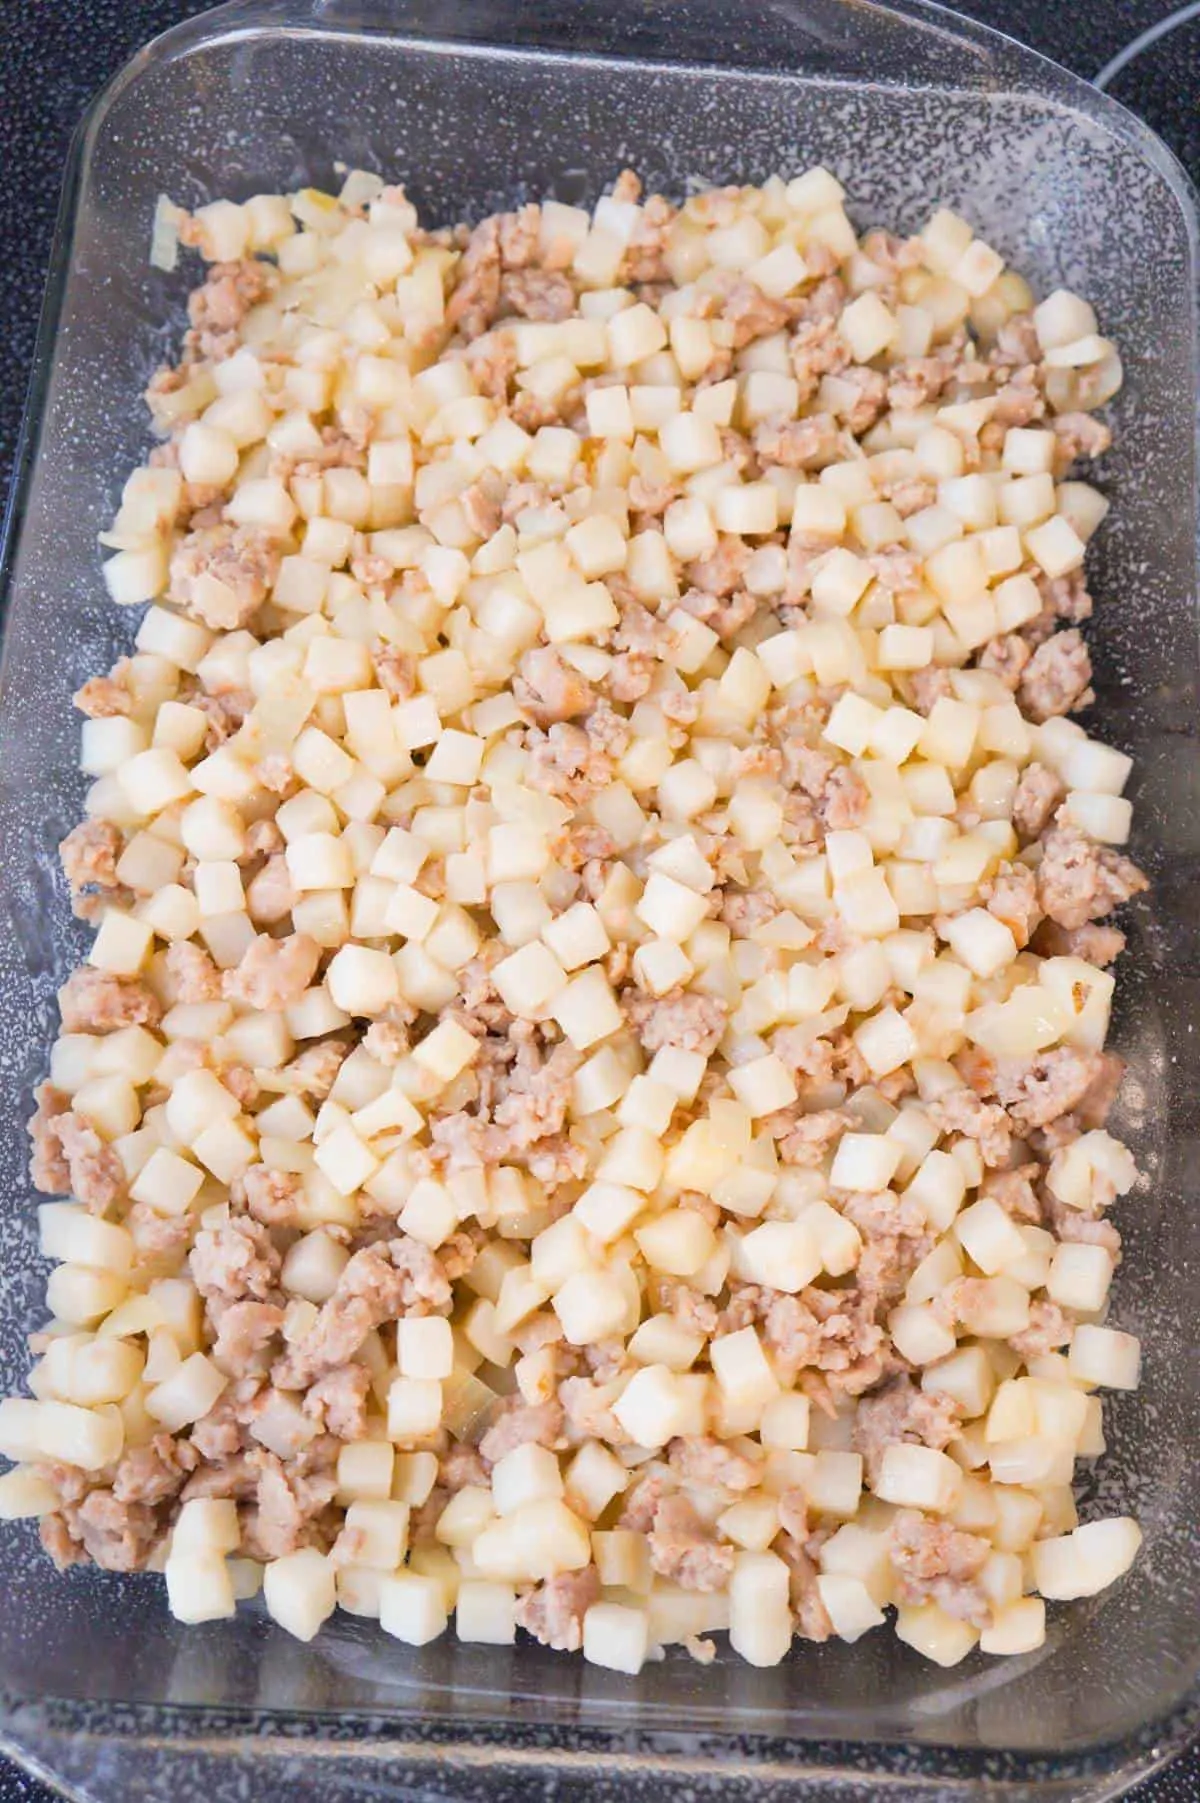 sausage meat and diced potatoes in a baking dish